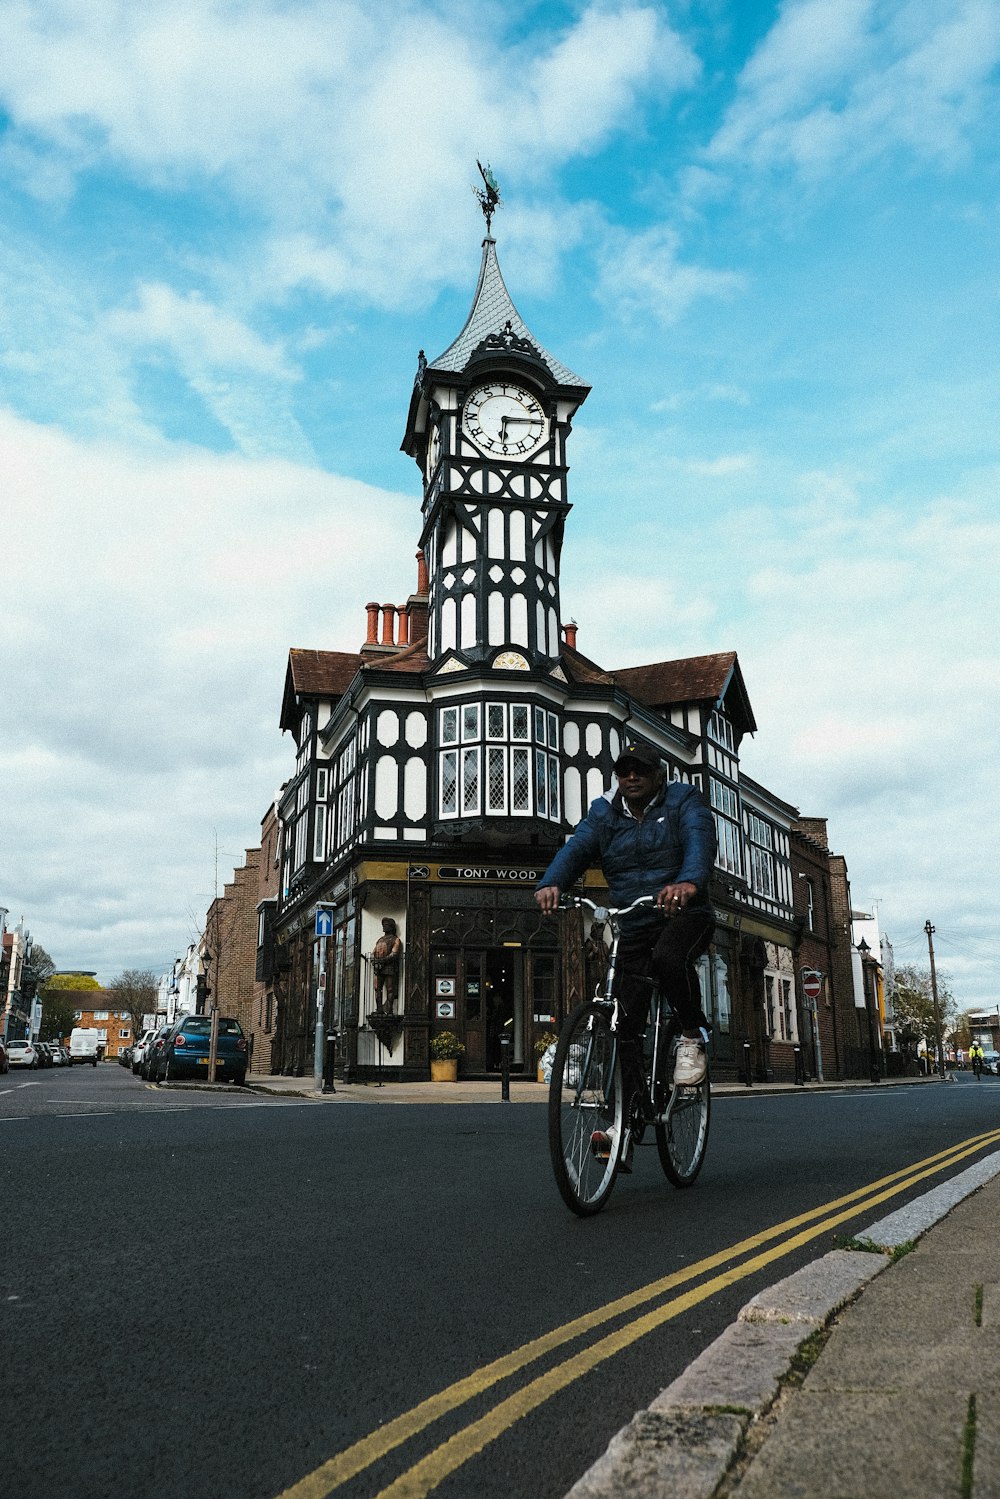 a person riding a bicycle in front of a clock tower